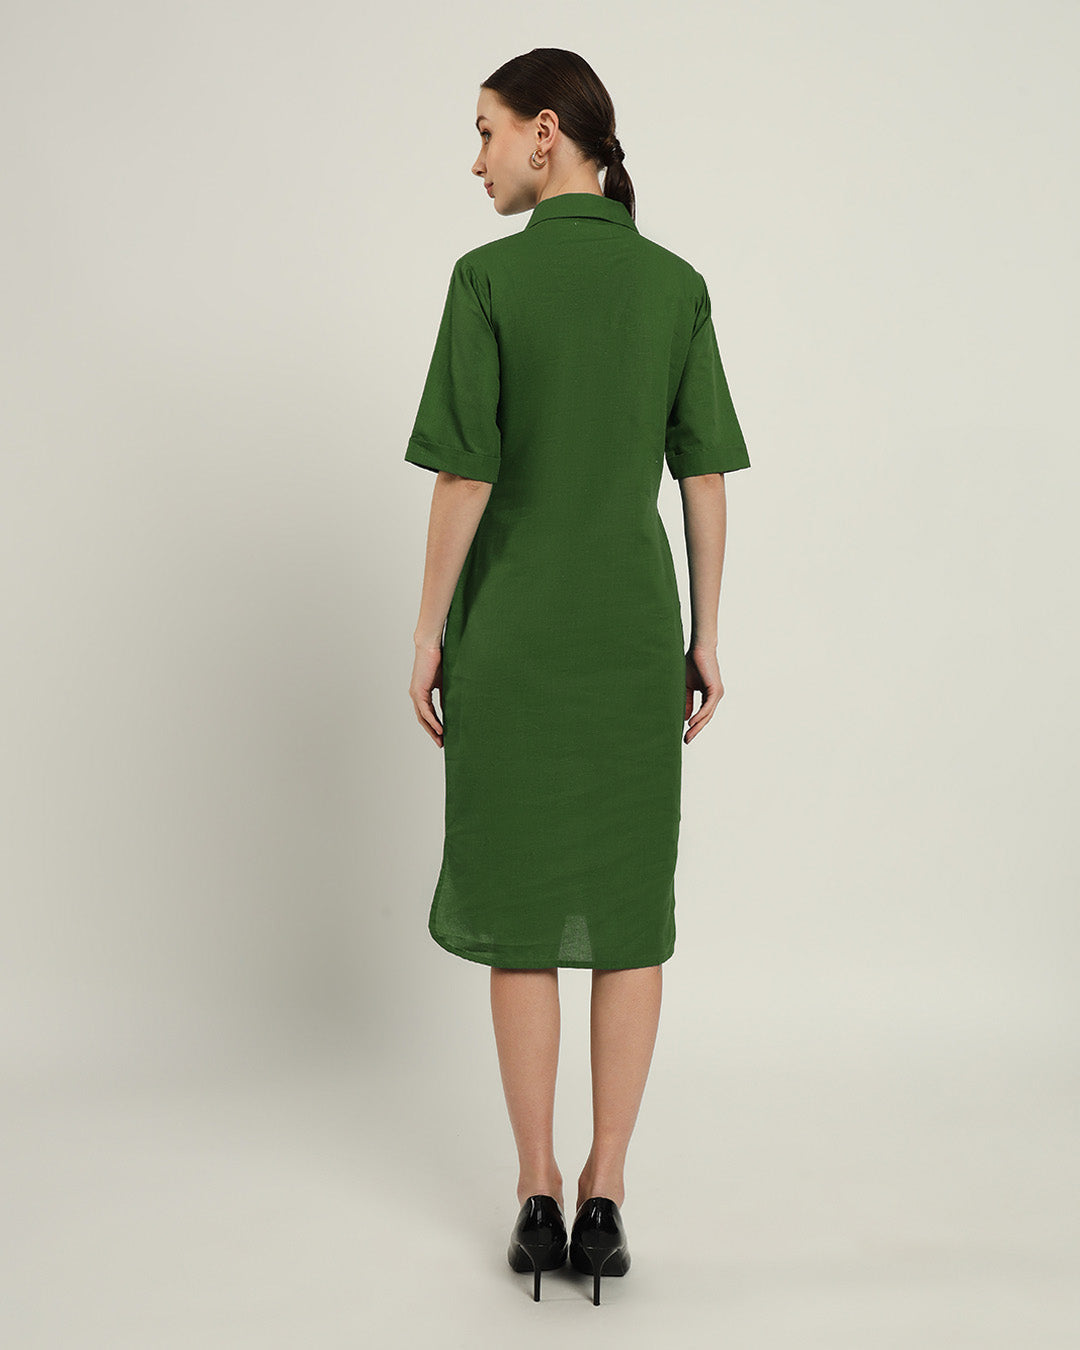 The Tampa Emerald Cotton Dress